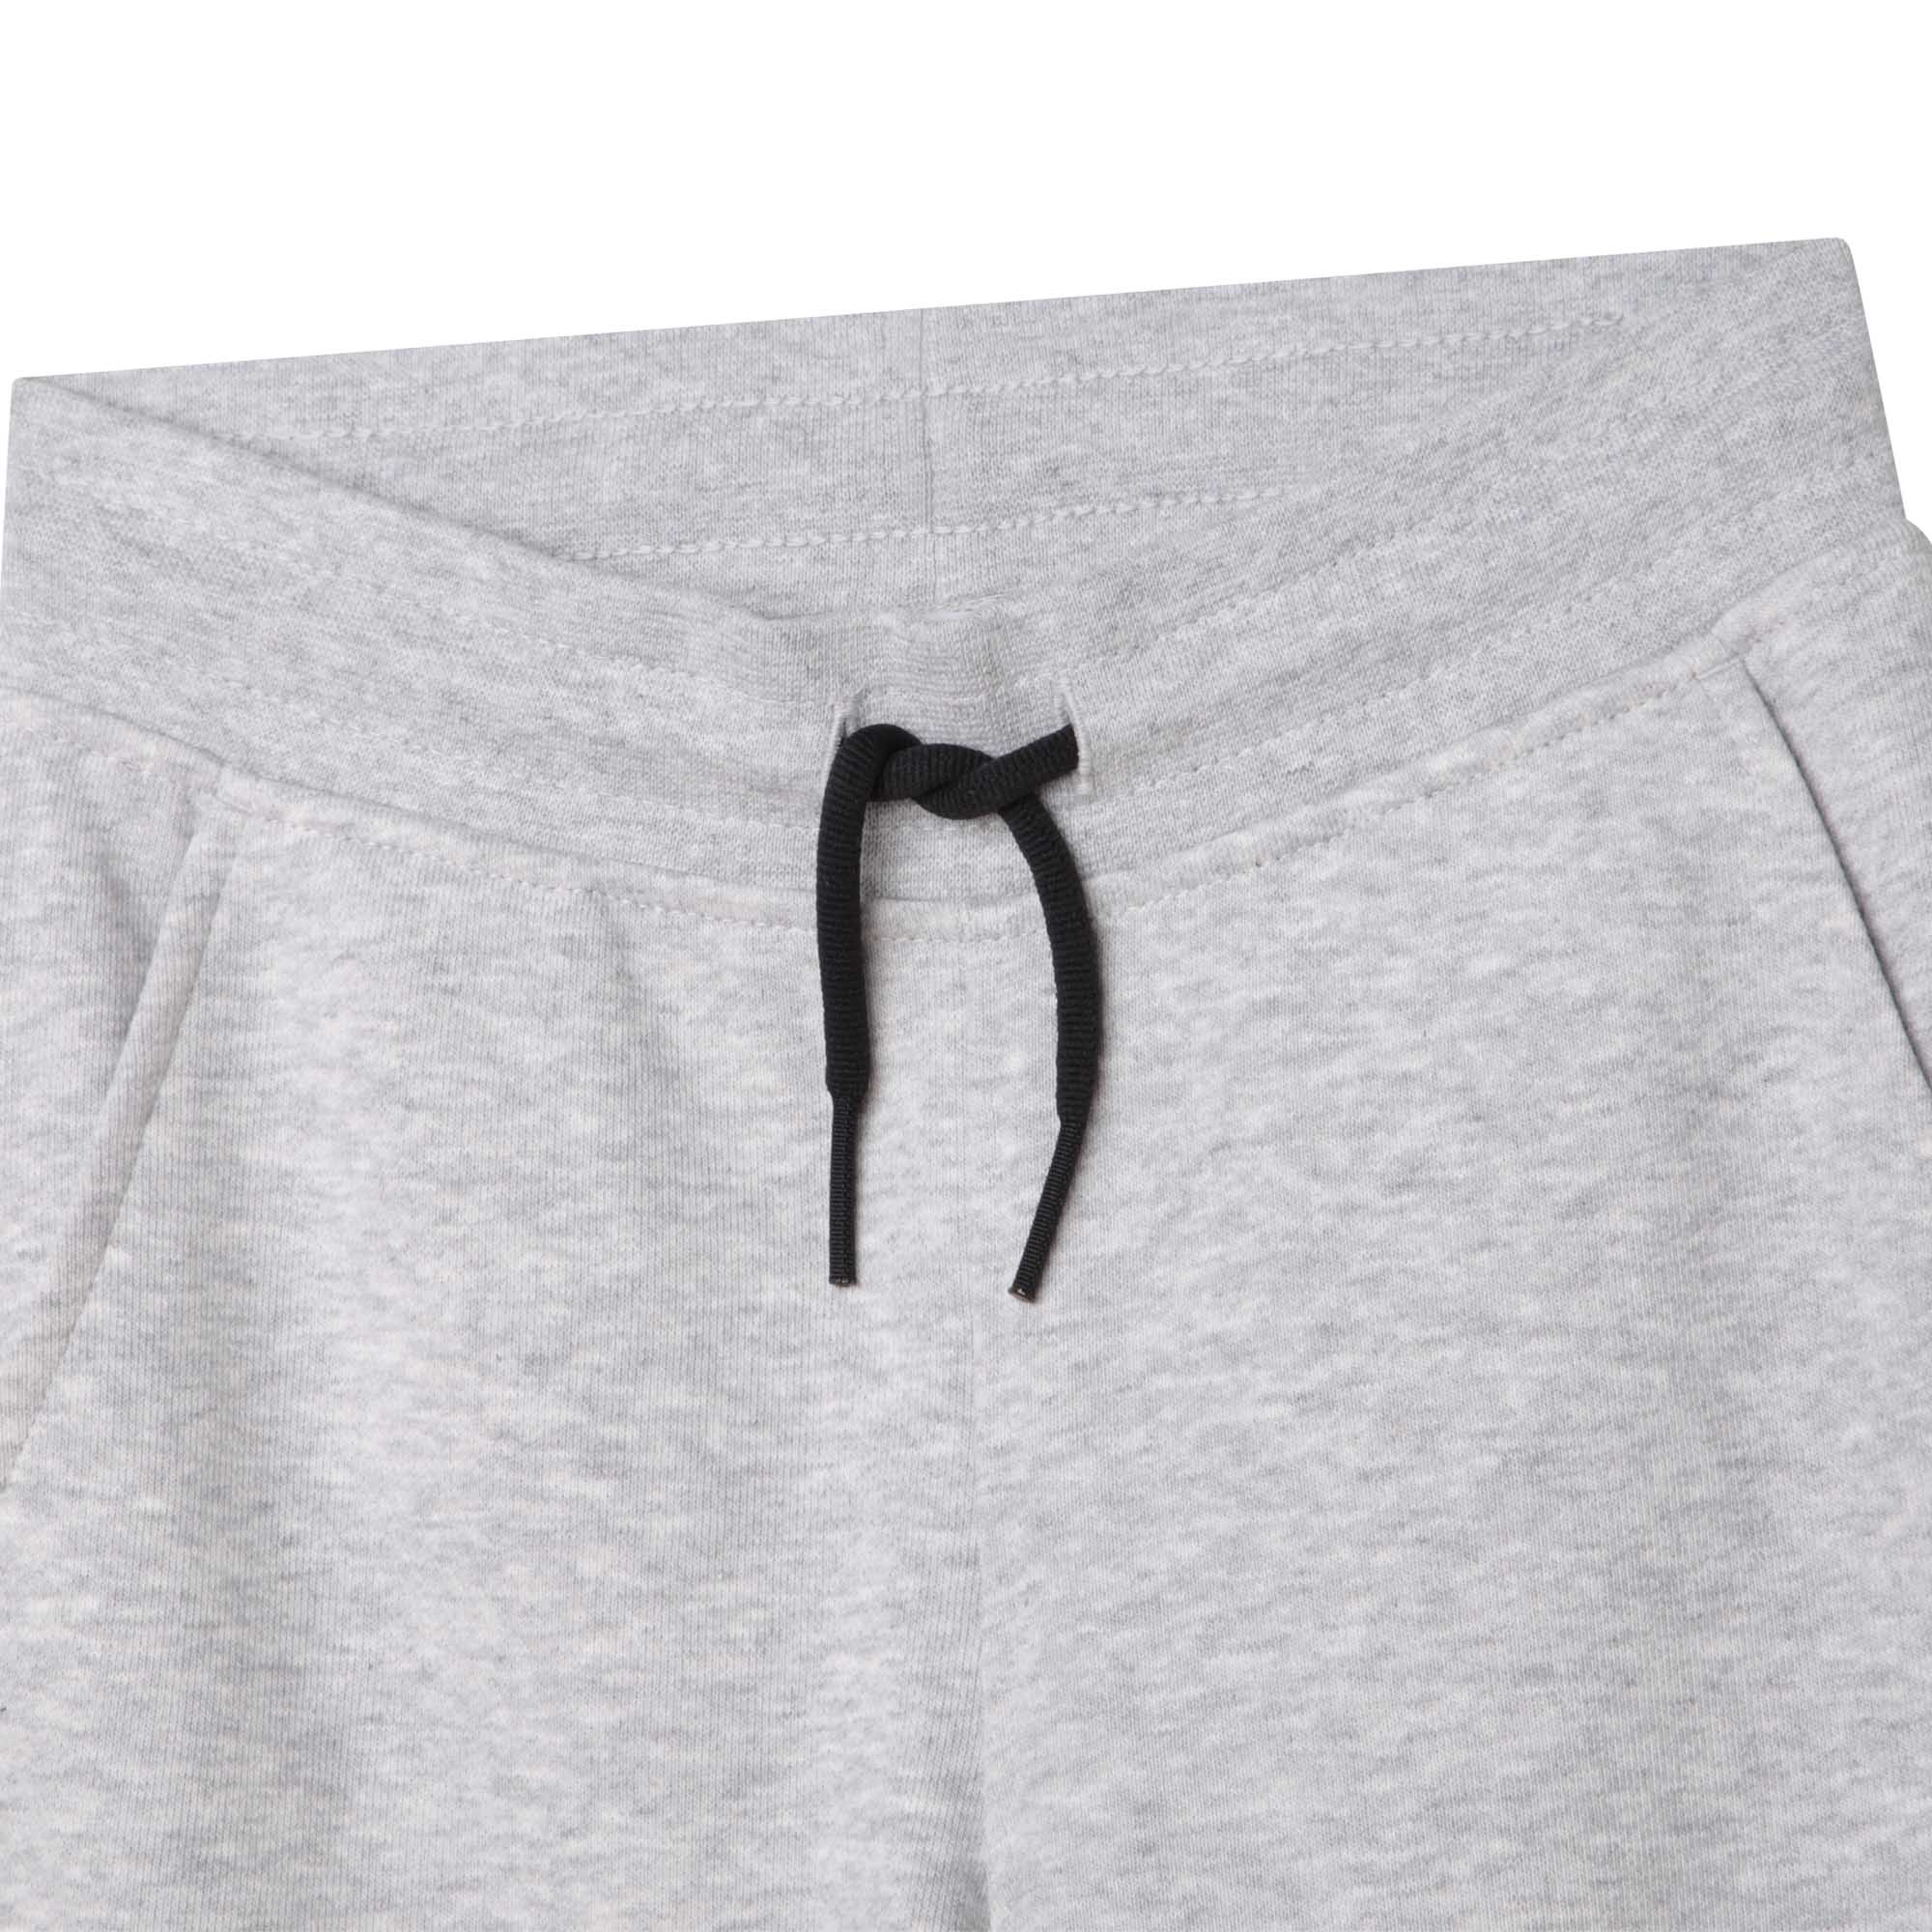 Boss boys grey tracksuit bottoms with large black logo close up